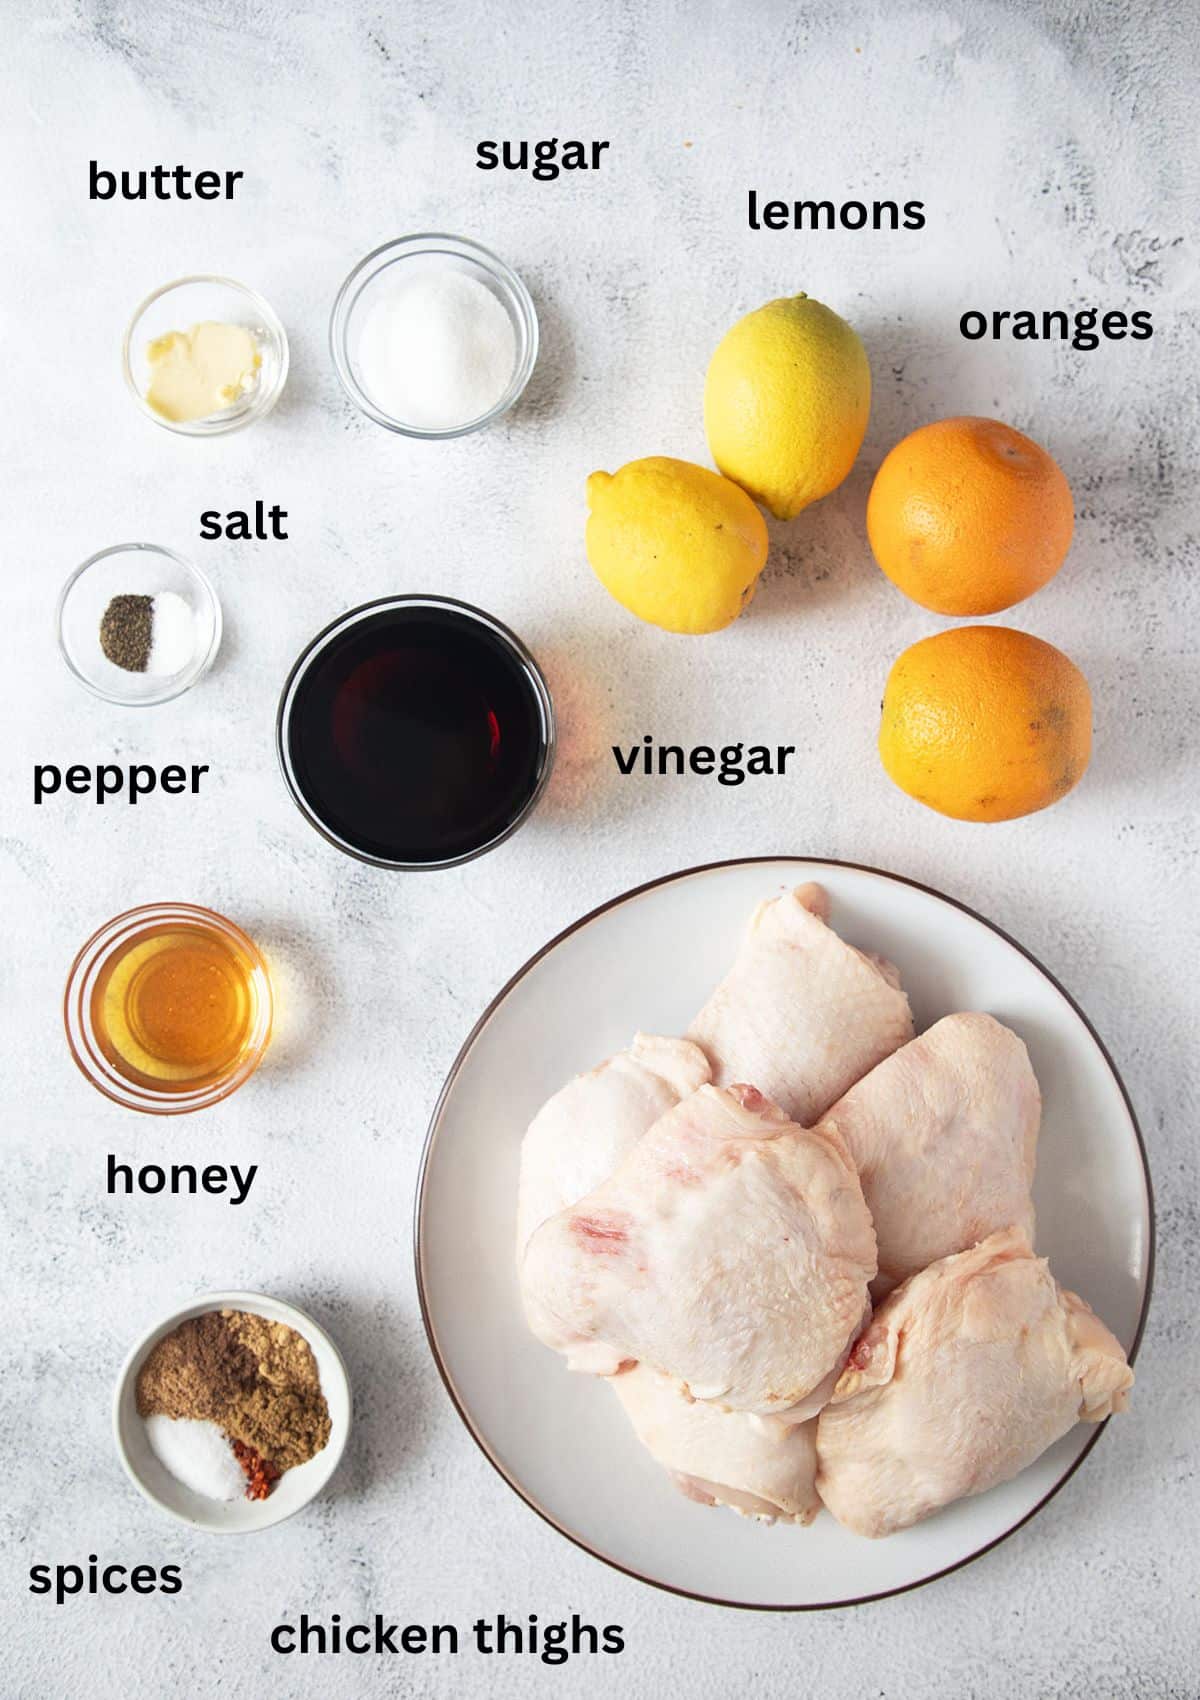 listed ingredients for cooking chicken thighs with sweet and sour sauce.